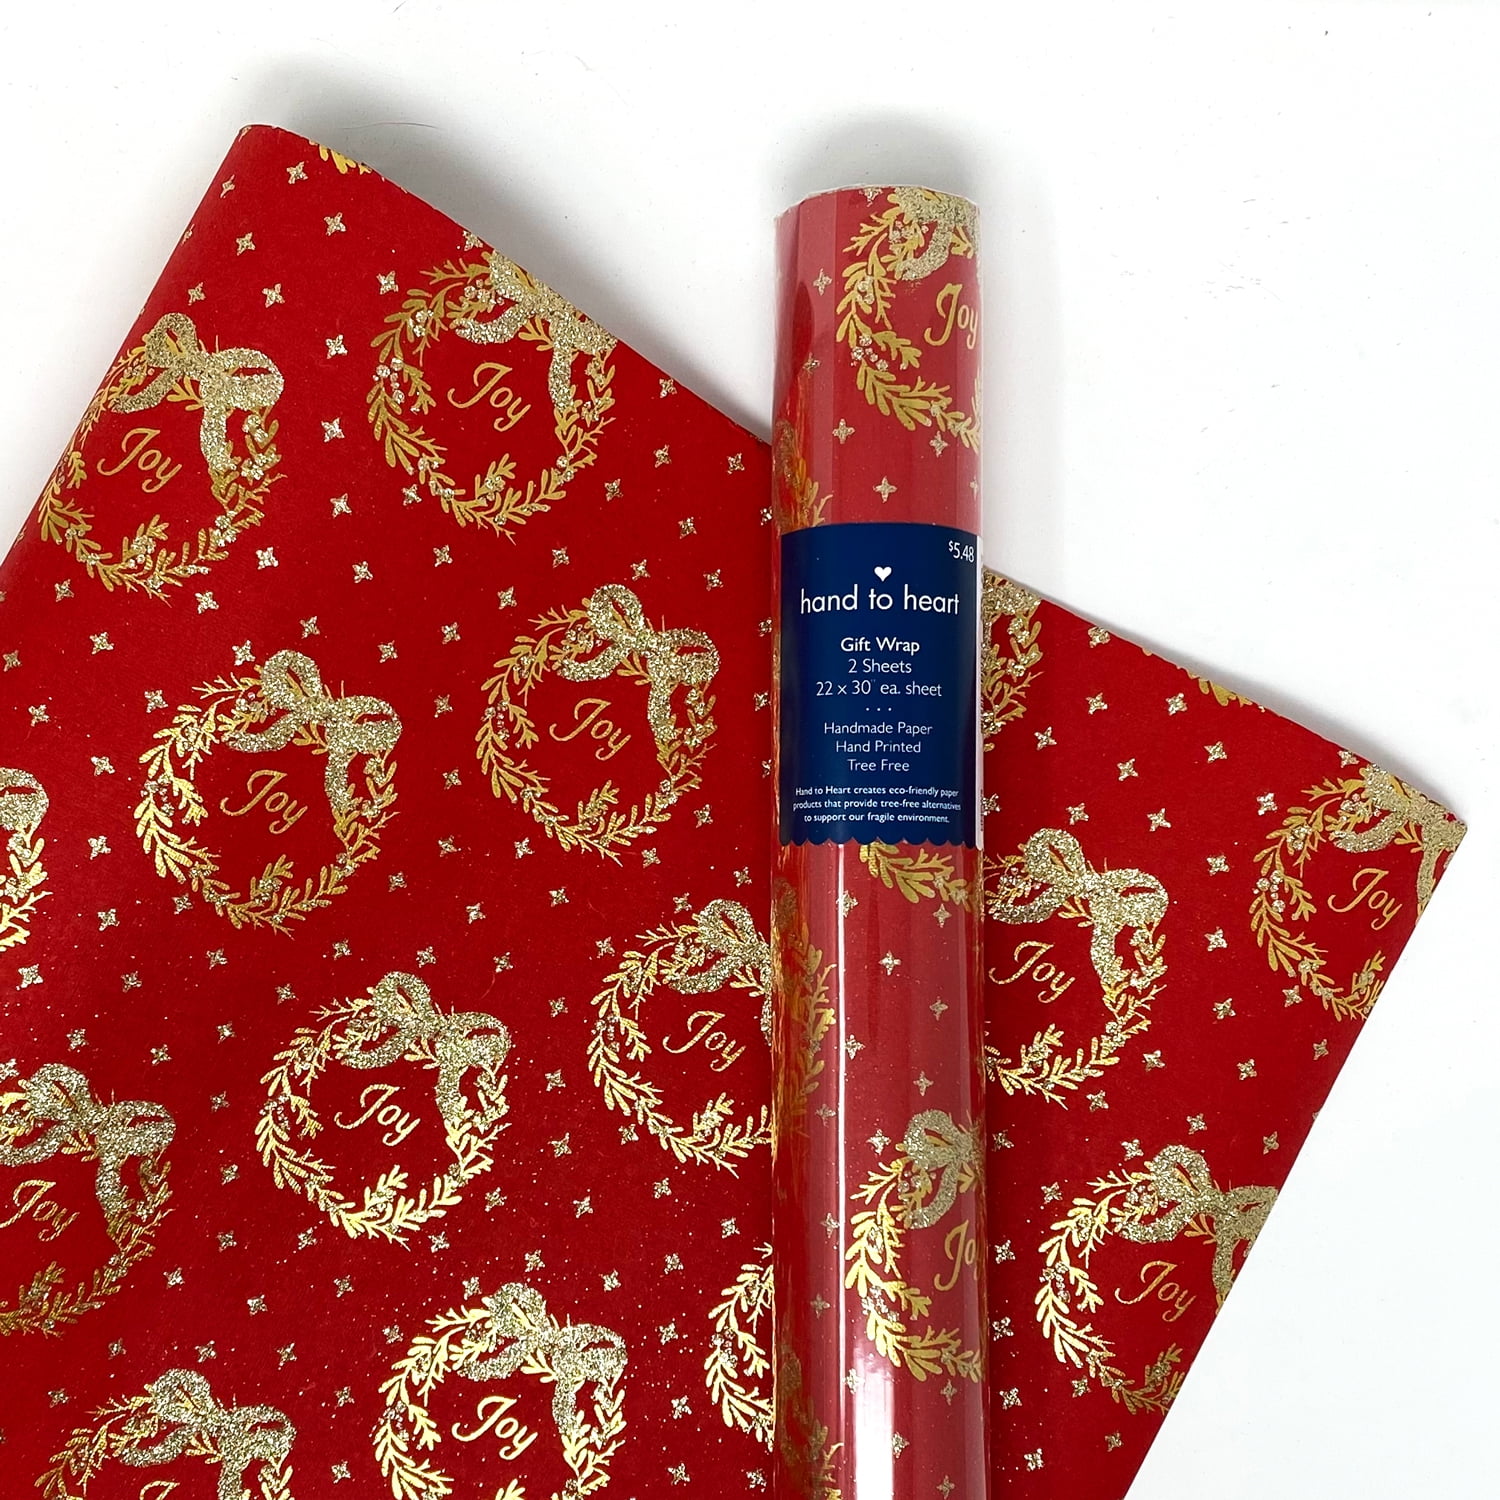 Christmas Wrapping Paper, Red with Gold Wreath Design, Premium Specialty  Paper